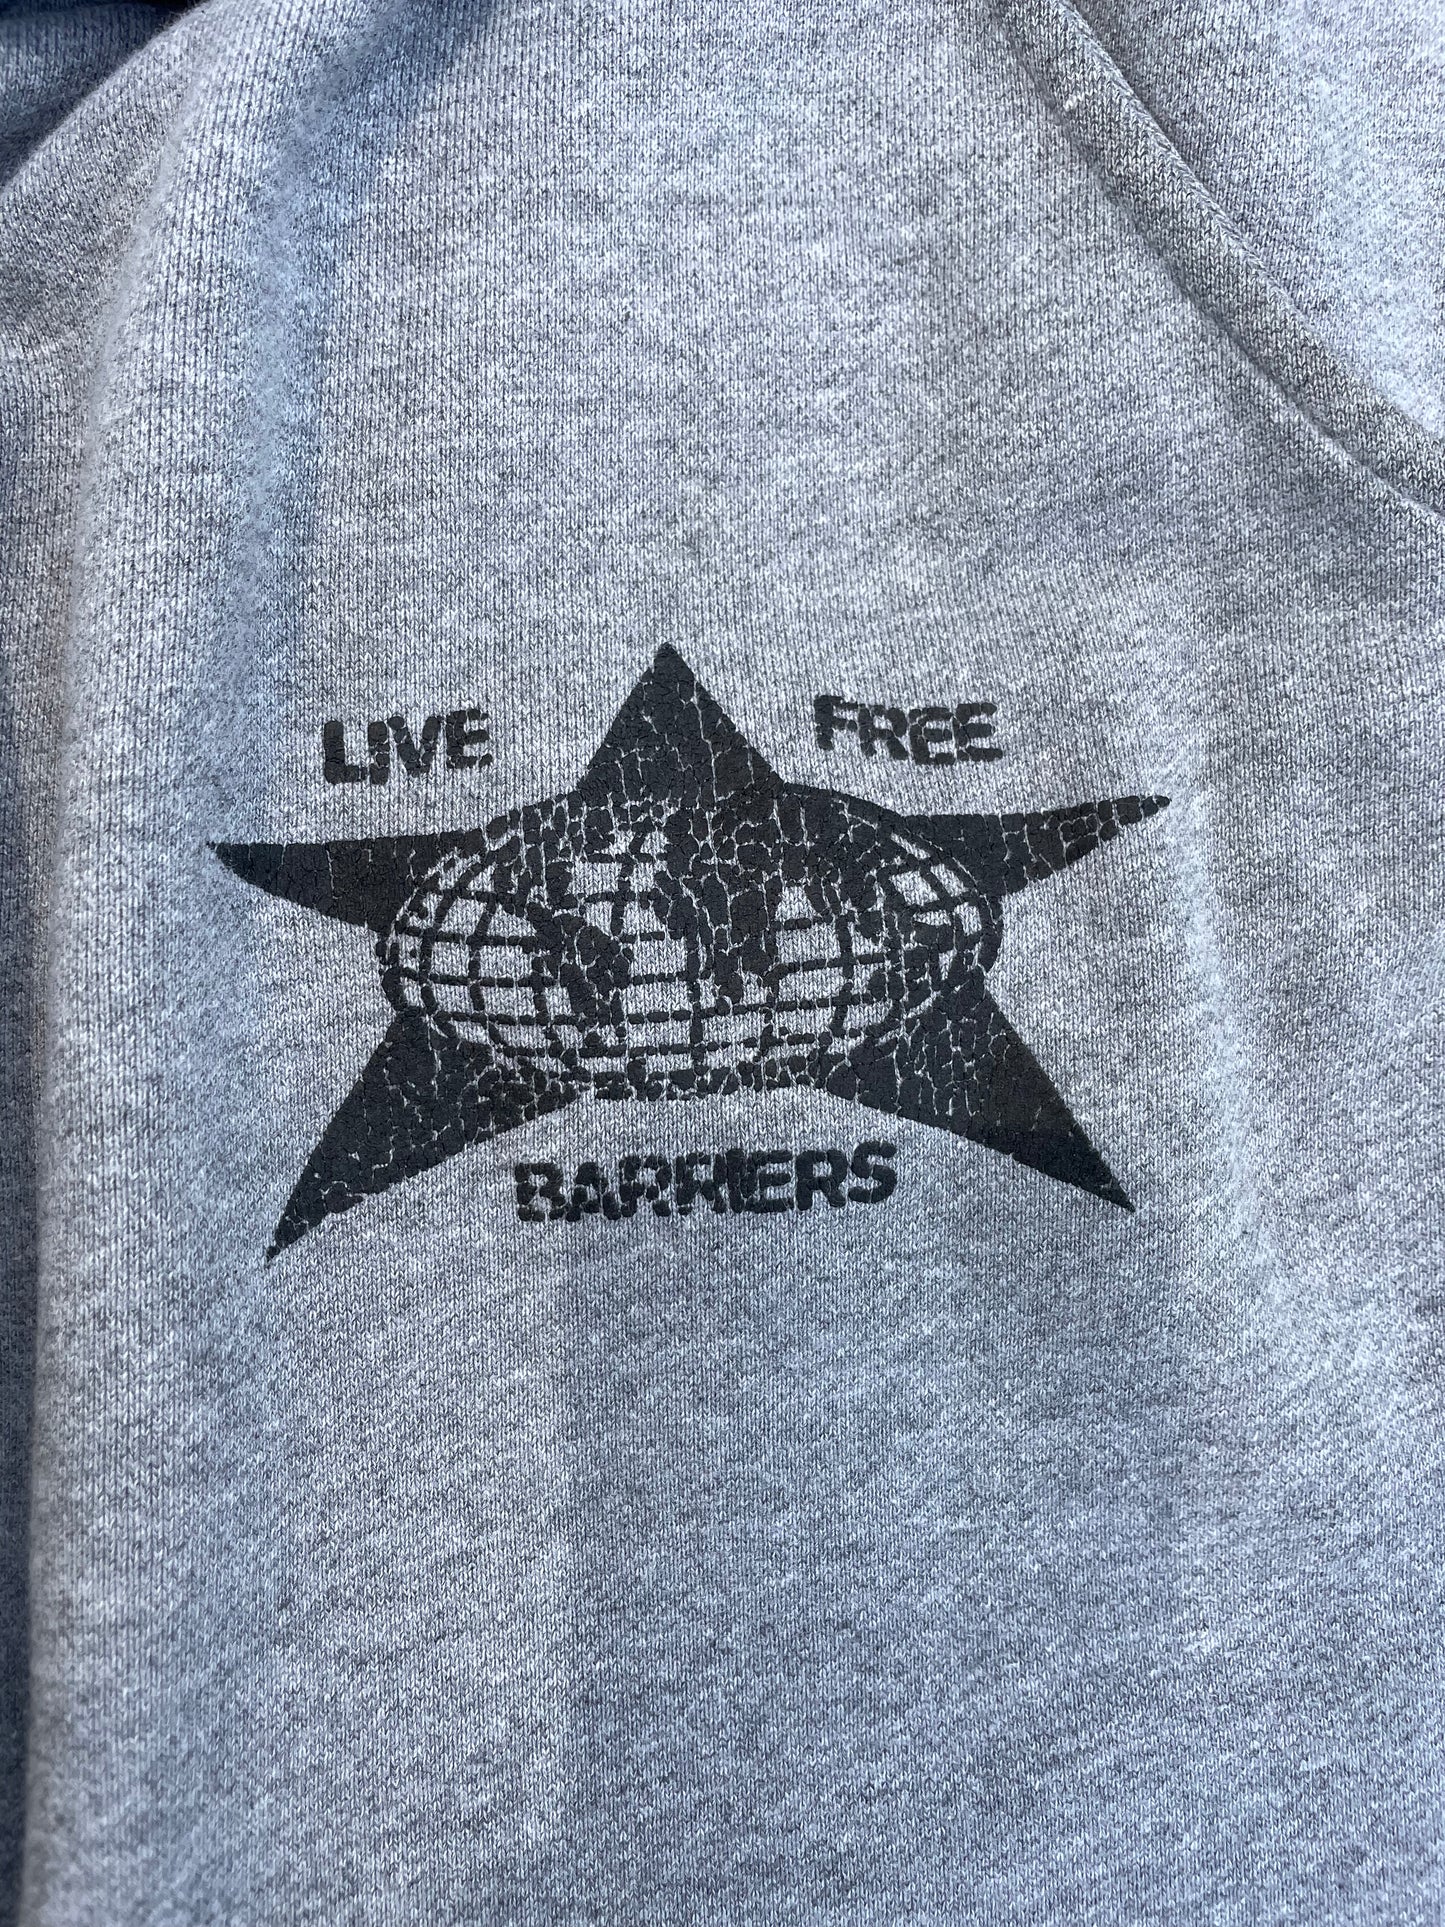 2021 Barriers “Live Free” Sweatpant